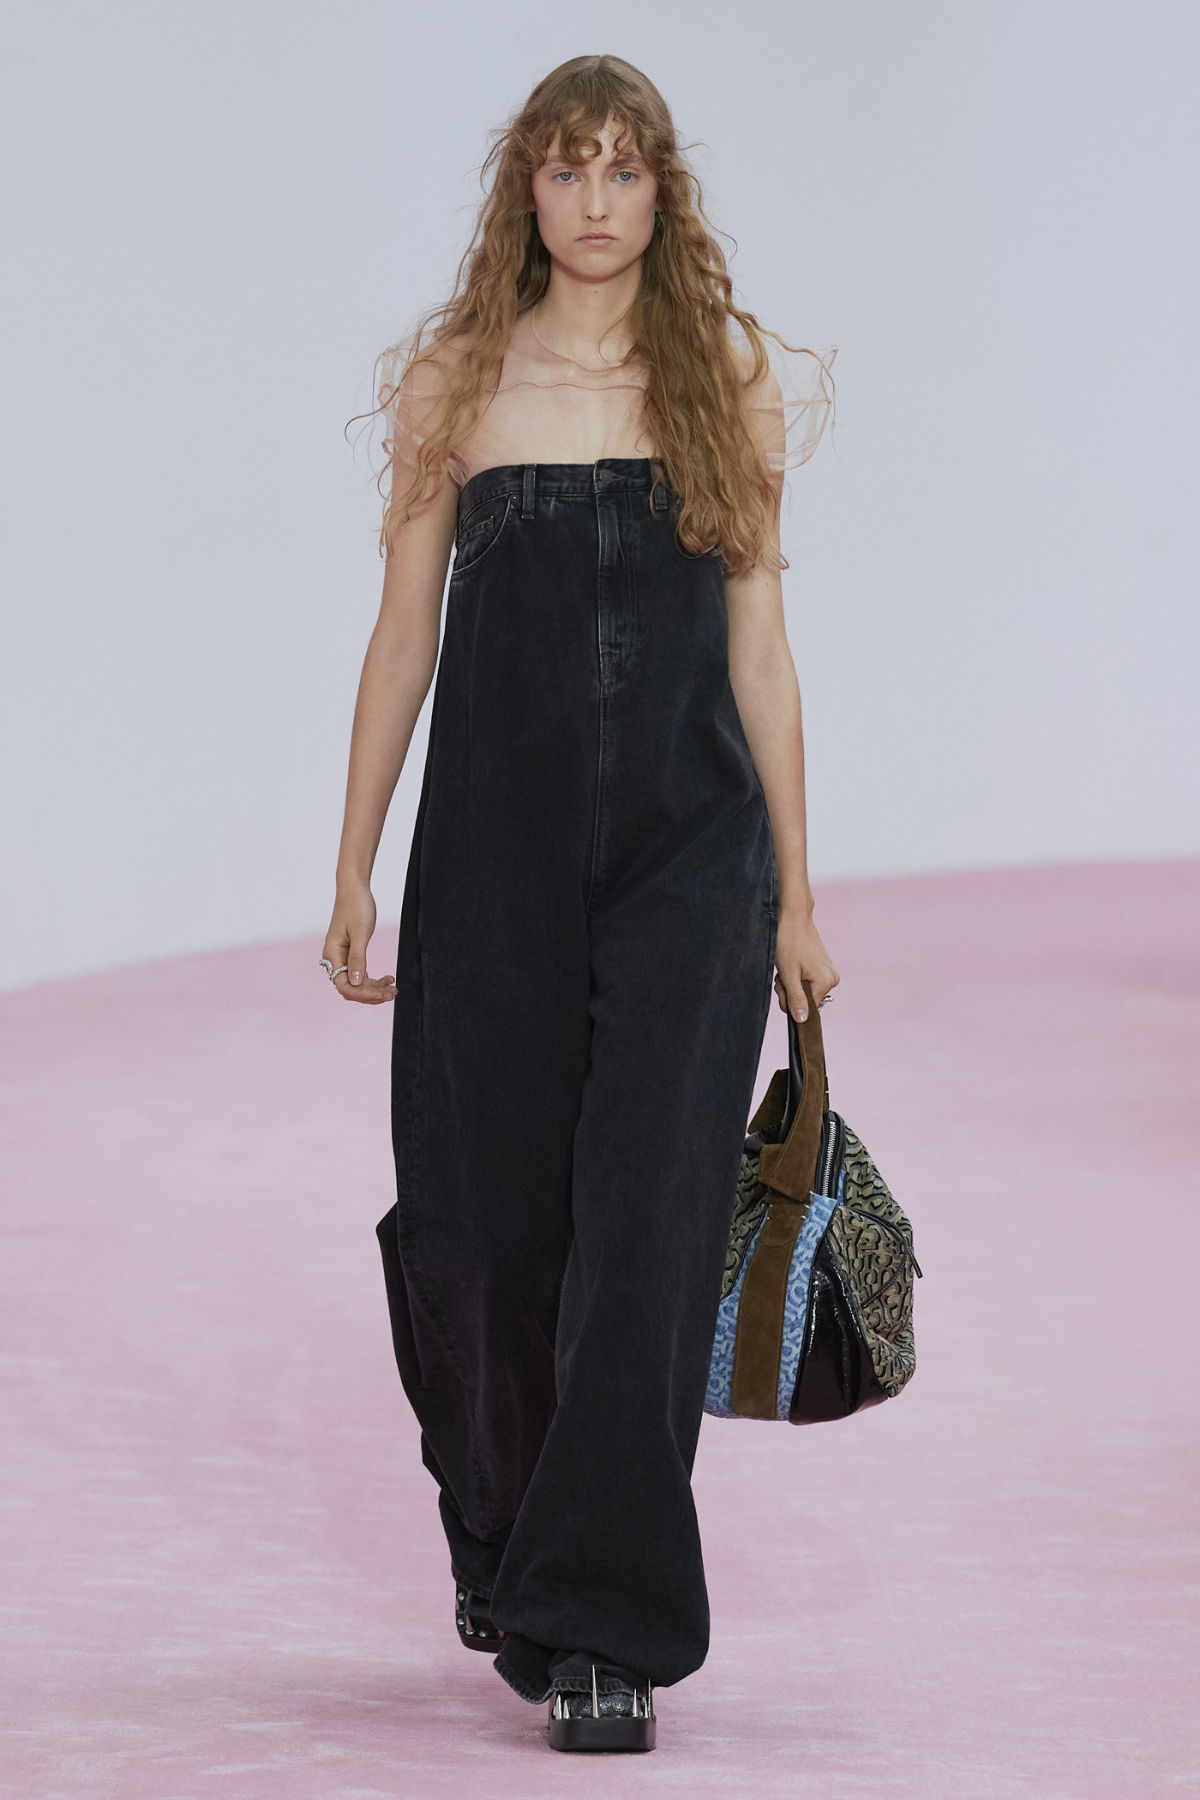 Acne Studios Presents Its New Women’s Spring/Summer 2023 Collection